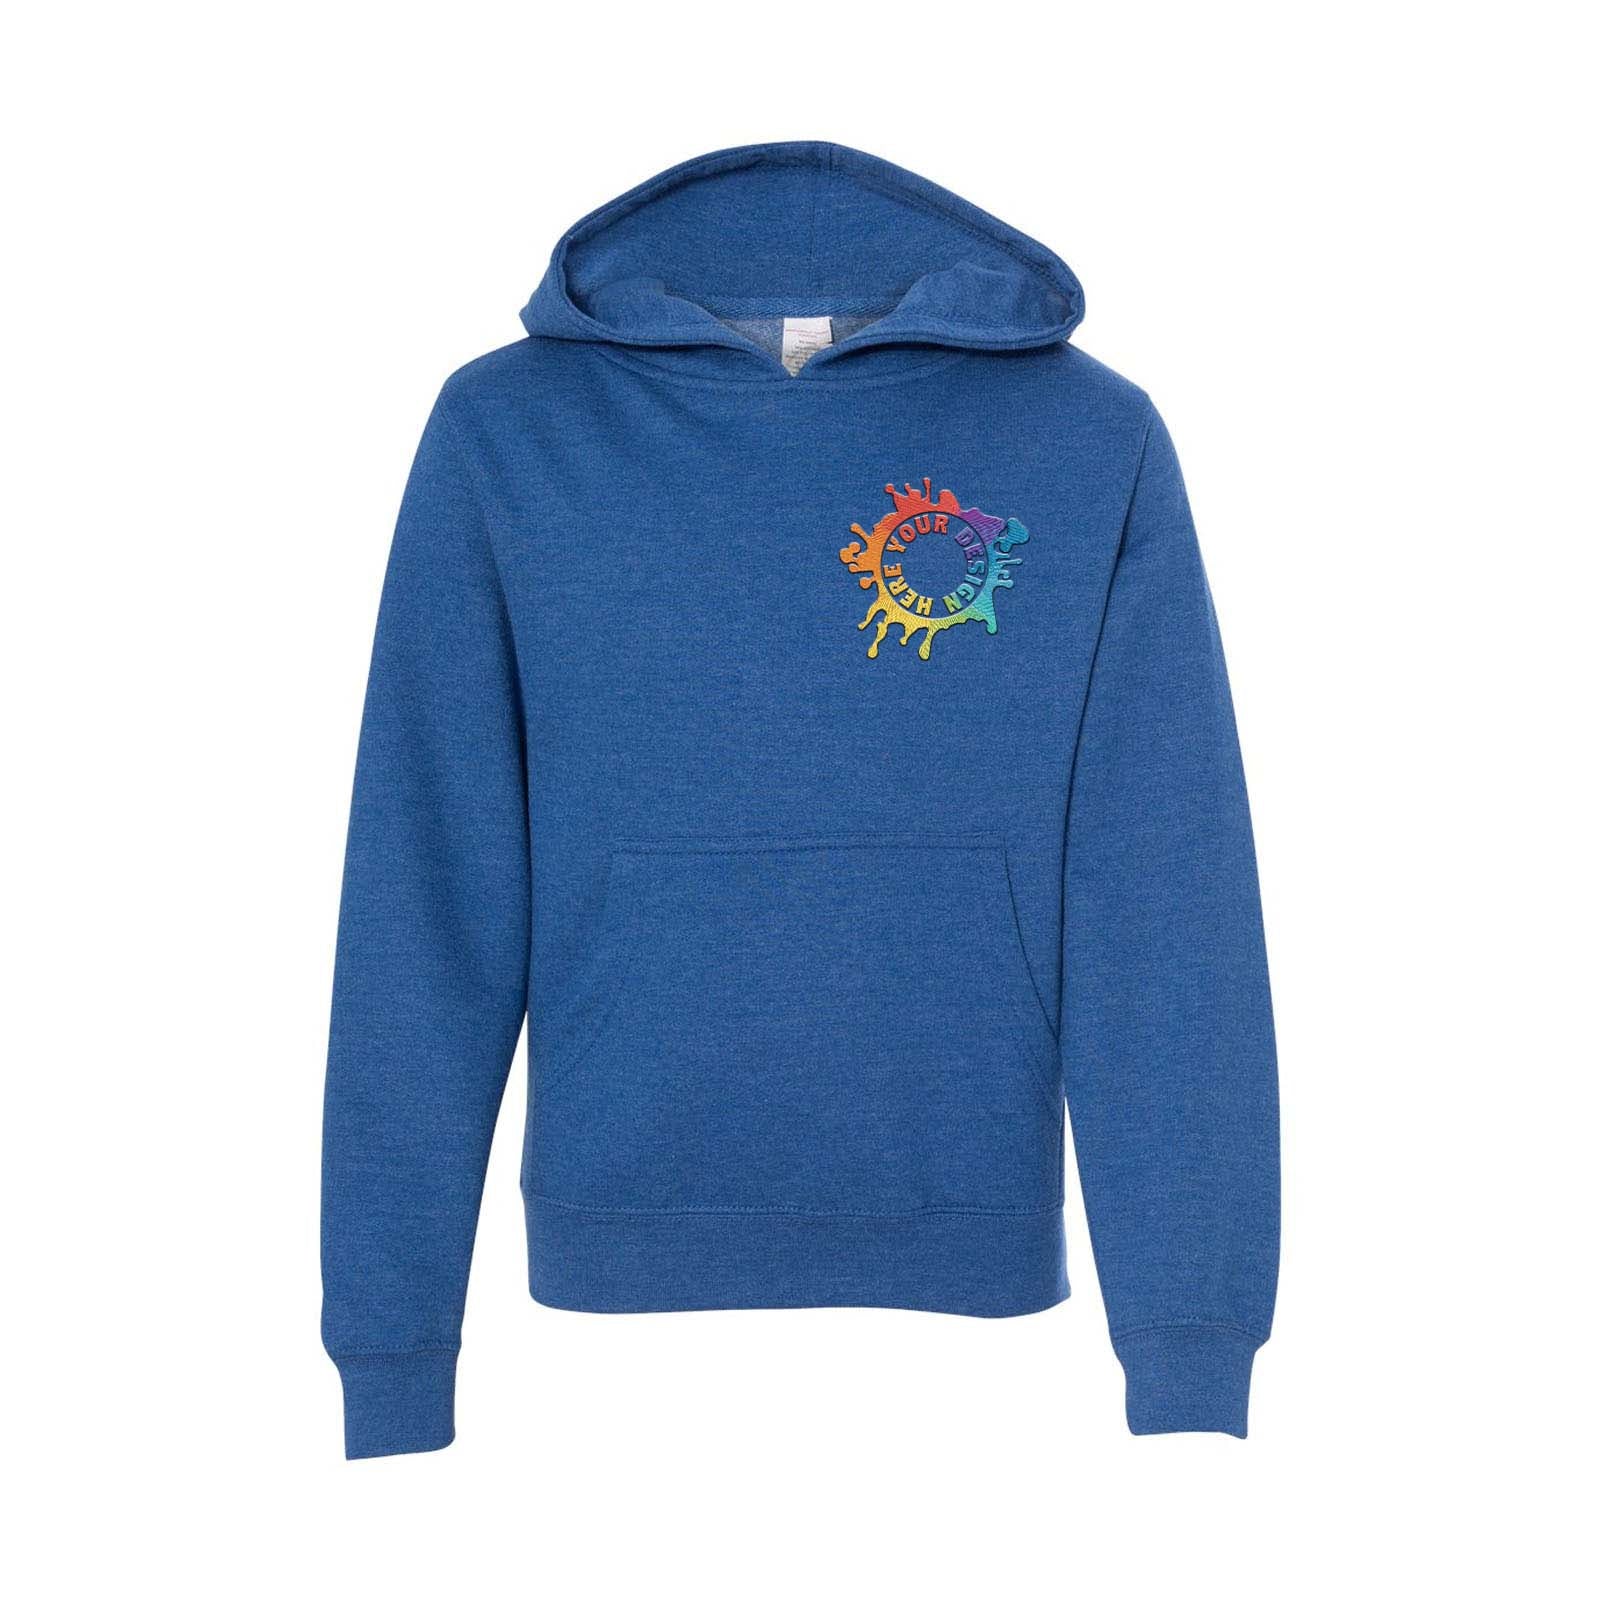 Independent Trading Co. Youth Midweight Hooded Sweatshirt Embroidery - Mato & Hash